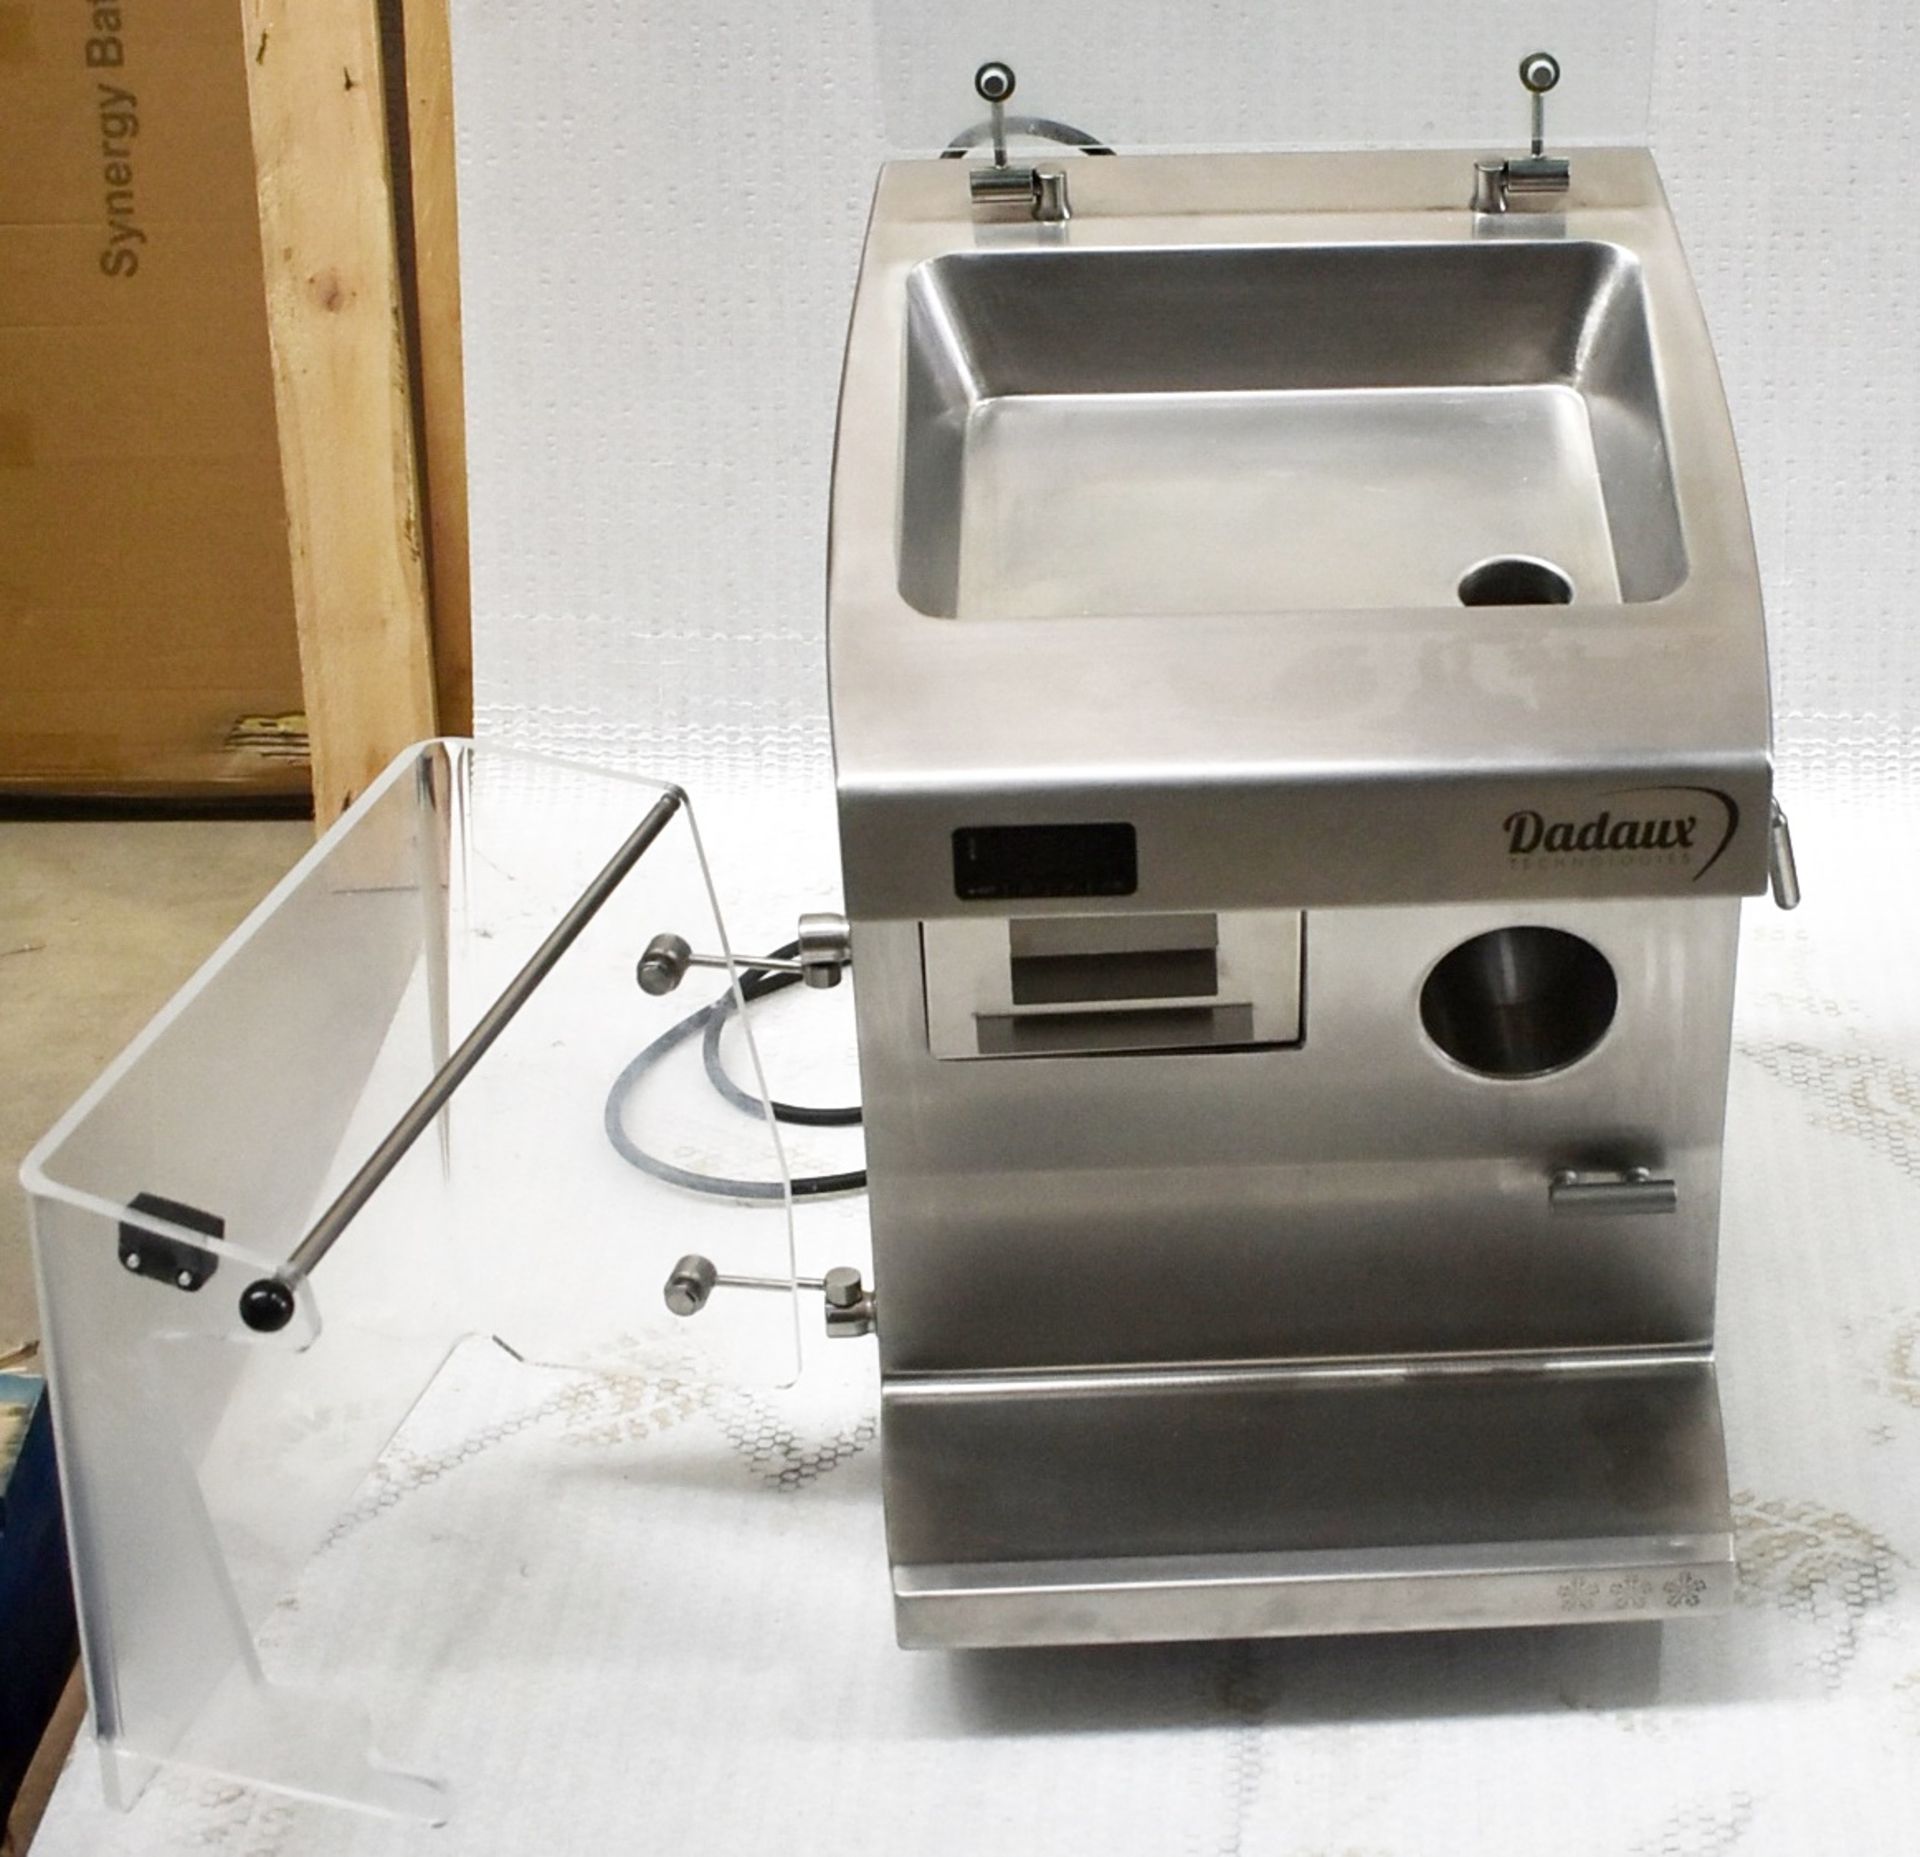 1 x Dadaux Setna Refrigerated Meat Mincer - Image 5 of 17